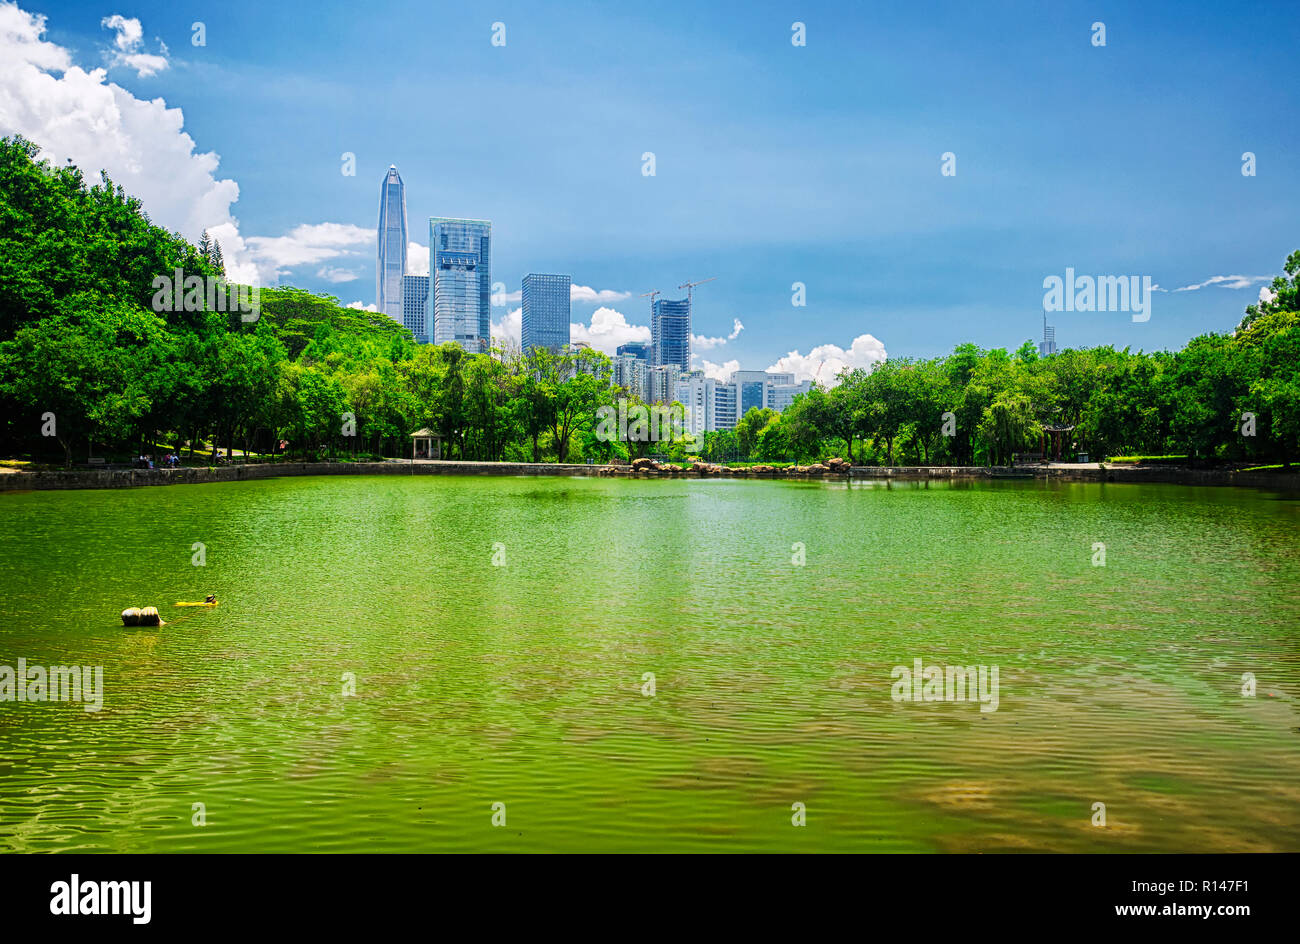 The shenzhen city skyline in the background of a manmade lake inside of Lianhuashan park in Shenzhen china on a sunny blue sky day. Stock Photo